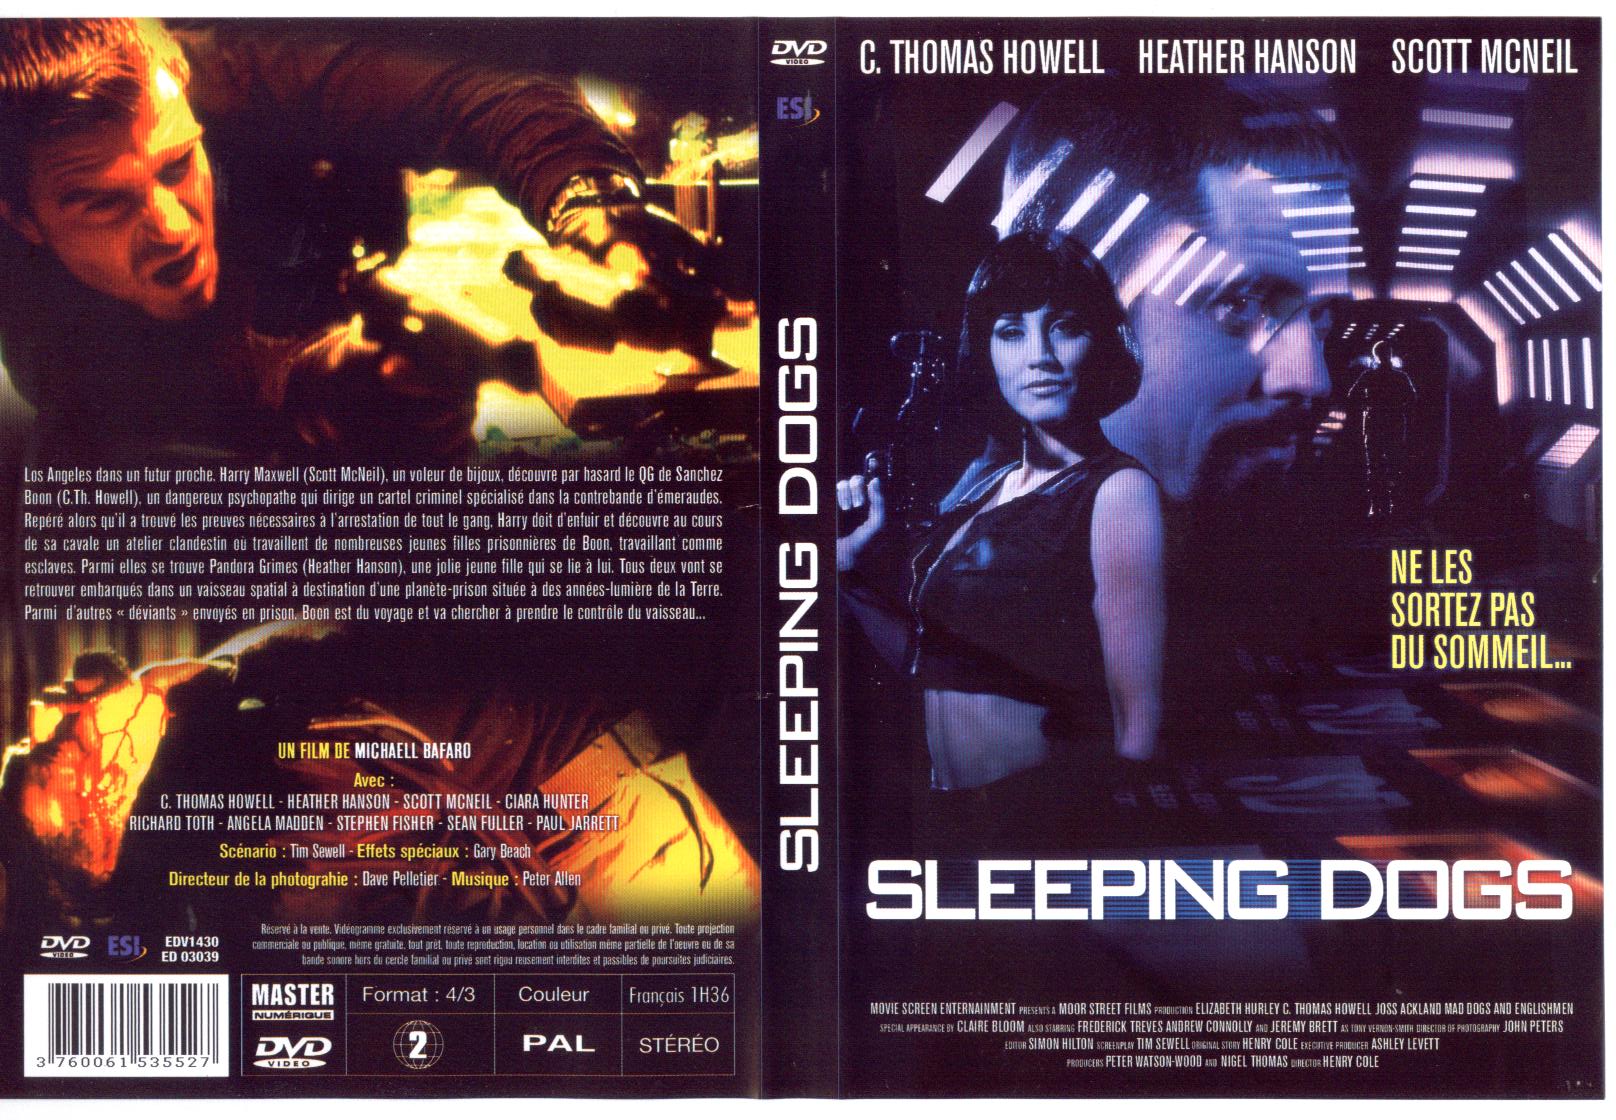 Jaquette DVD Sleeping dogs